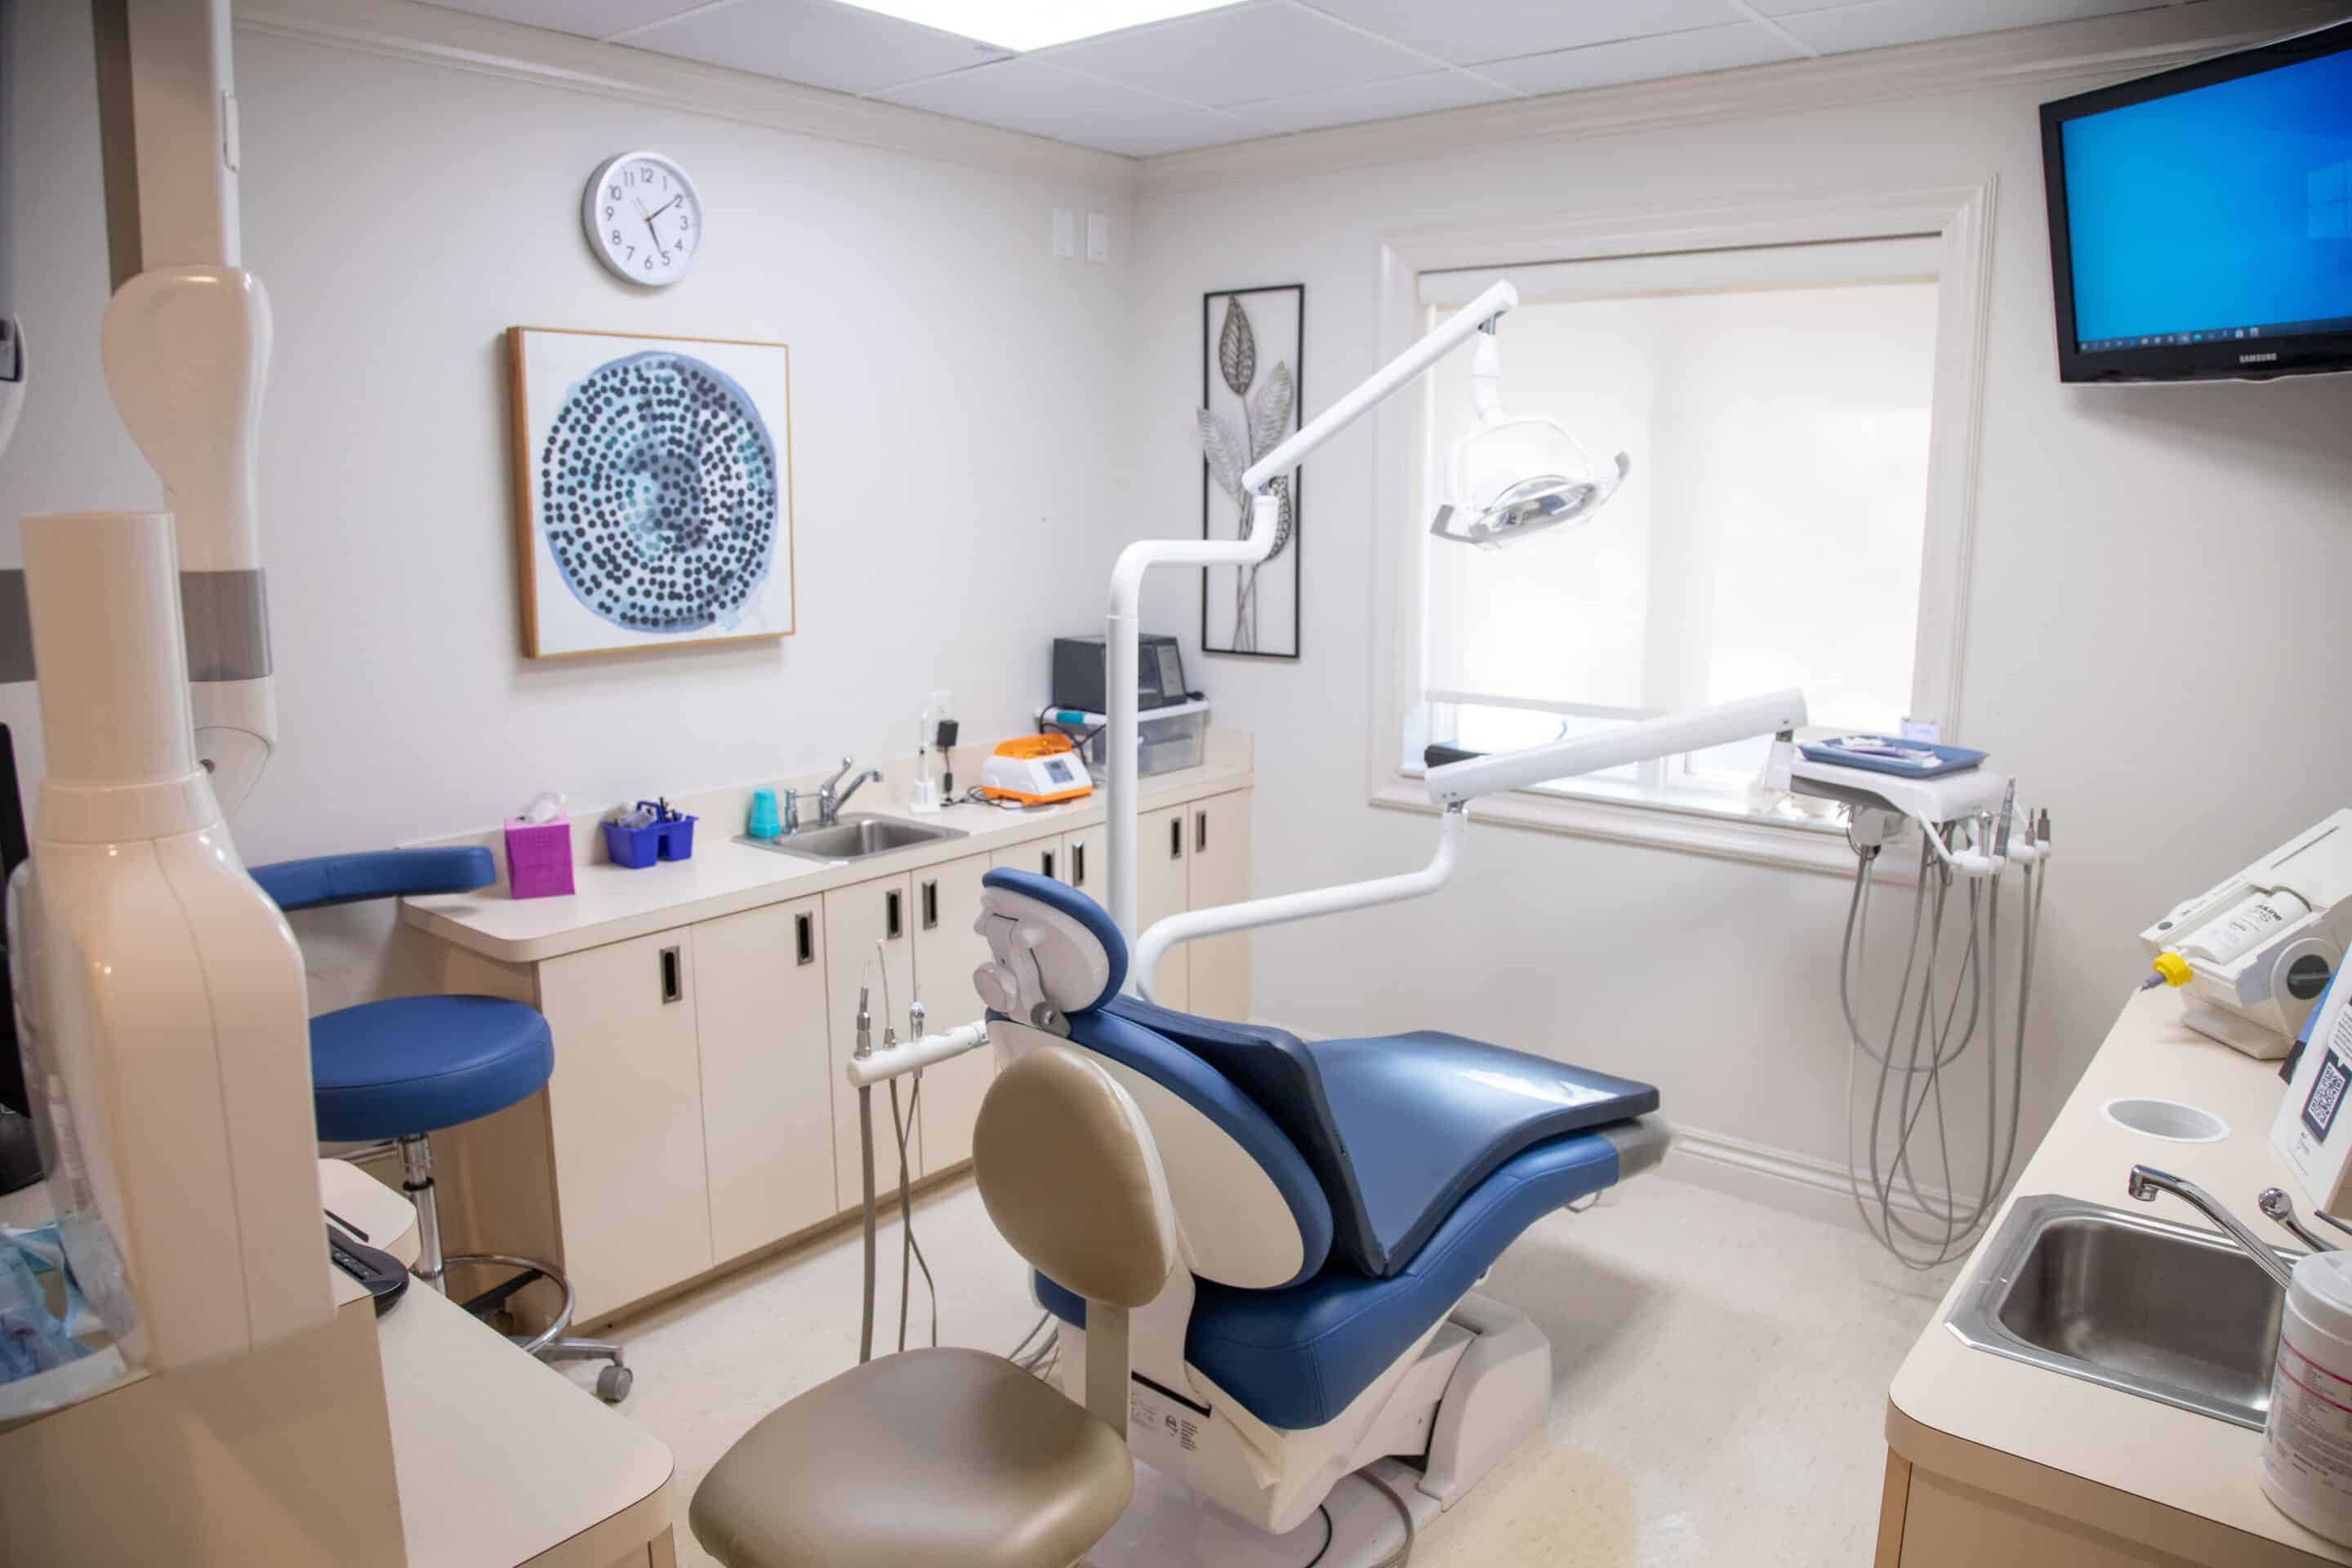 A view inside a dental exam room, with abstract, cool-toned wall art and neatly arranged equipment.